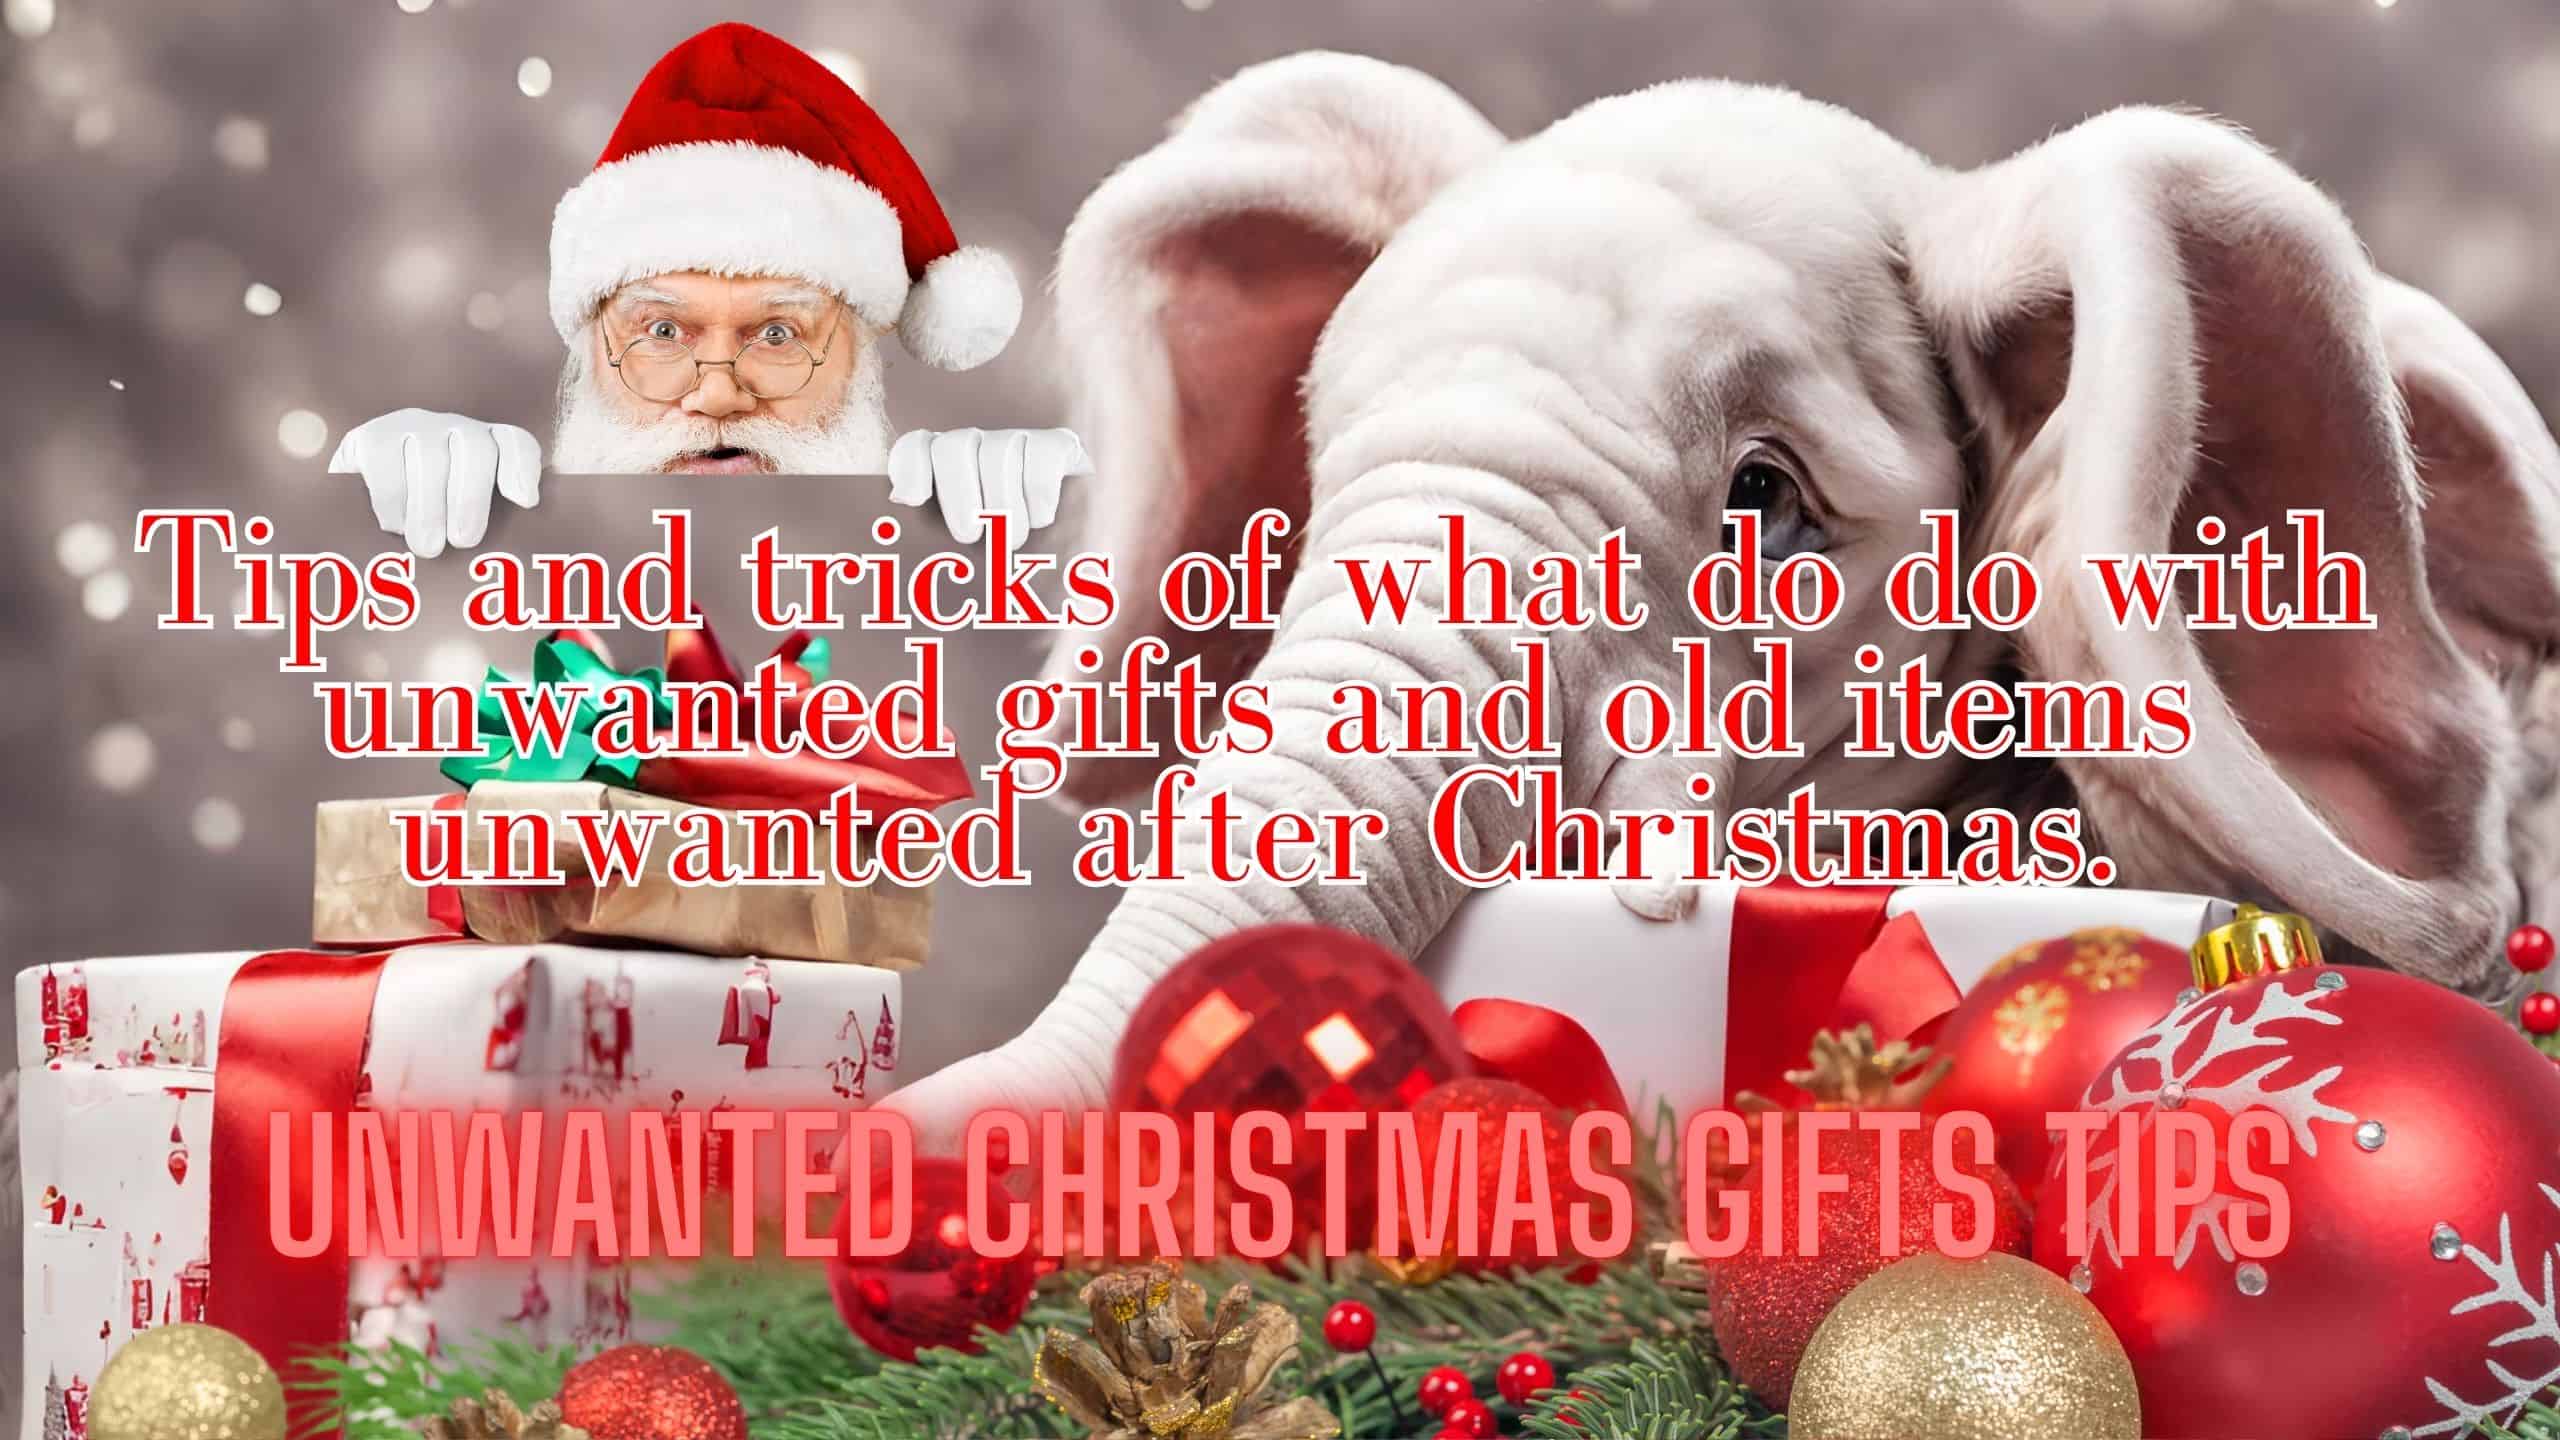 Tips and tricks of what to do with unwanted gifts and old items unwanted after Christmas. Donate, Re-gift, White Elephant parties. Waste Reduction Network / New Day Reuse 501 C3